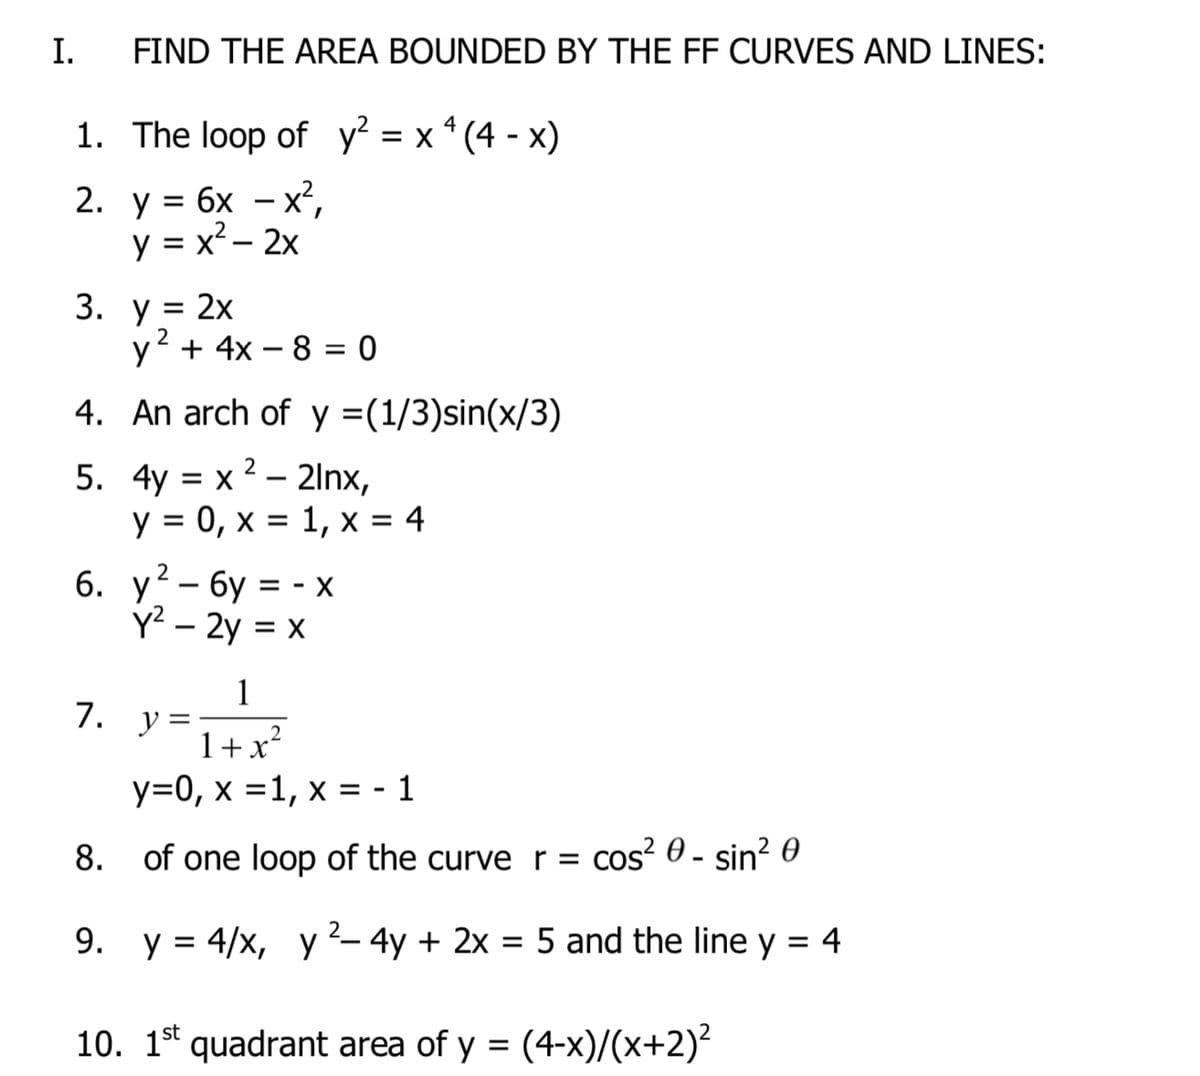 I.
FIND THE AREA BOUNDED BY THE FF CURVES AND LINES:
1. The loop of y² = x * (4 - x)
%3D
2. у%3D бх — х?,
y = x² – 2x
3.
= 2x
2
y + 4x – 8 = 0
4. An arch of y =(1/3)sin(x/3)
5. 4y = x 2 – 21lnx,
y = 0, x = 1, x = 4
6. у? - бу %3D- х
Y² – 2y = x
1
y =
1+x²
7.
y=0, x =1, x = - 1
8. of one loop of the curve r =
cos? 0 - sin? 0
2
9. y = 4/x, y– 4y + 2x = 5 and the line y = 4
%3D
10. 1* quadrant area of y = (4-x)/(x+2)²
